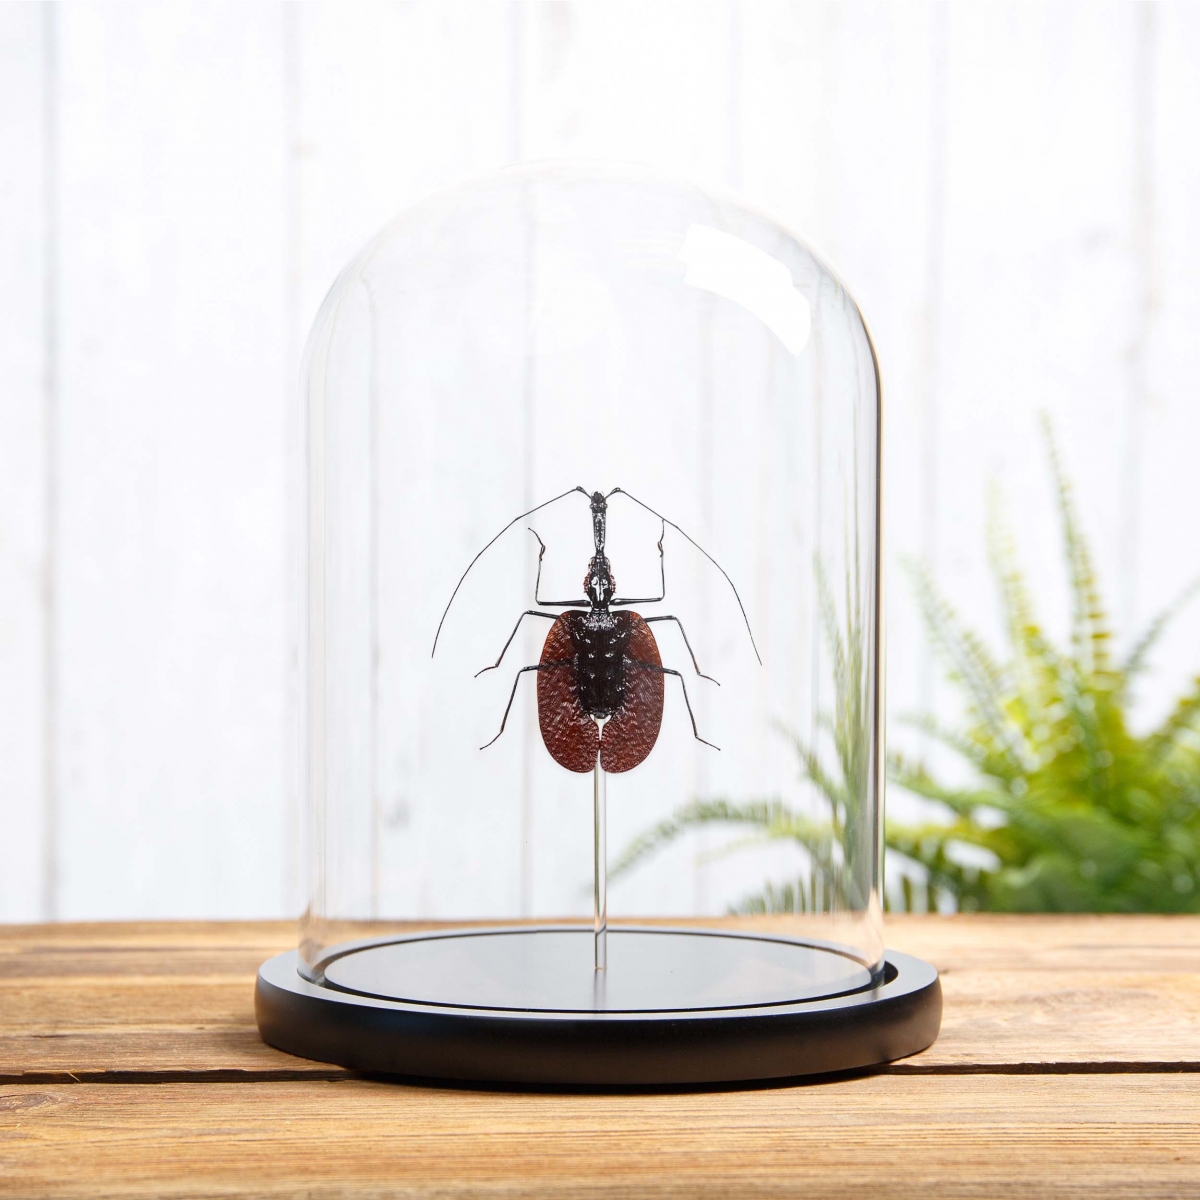 Minibeast Violin Beetle in Glass Dome with Wooden Base (Mormolyce phyllodes)